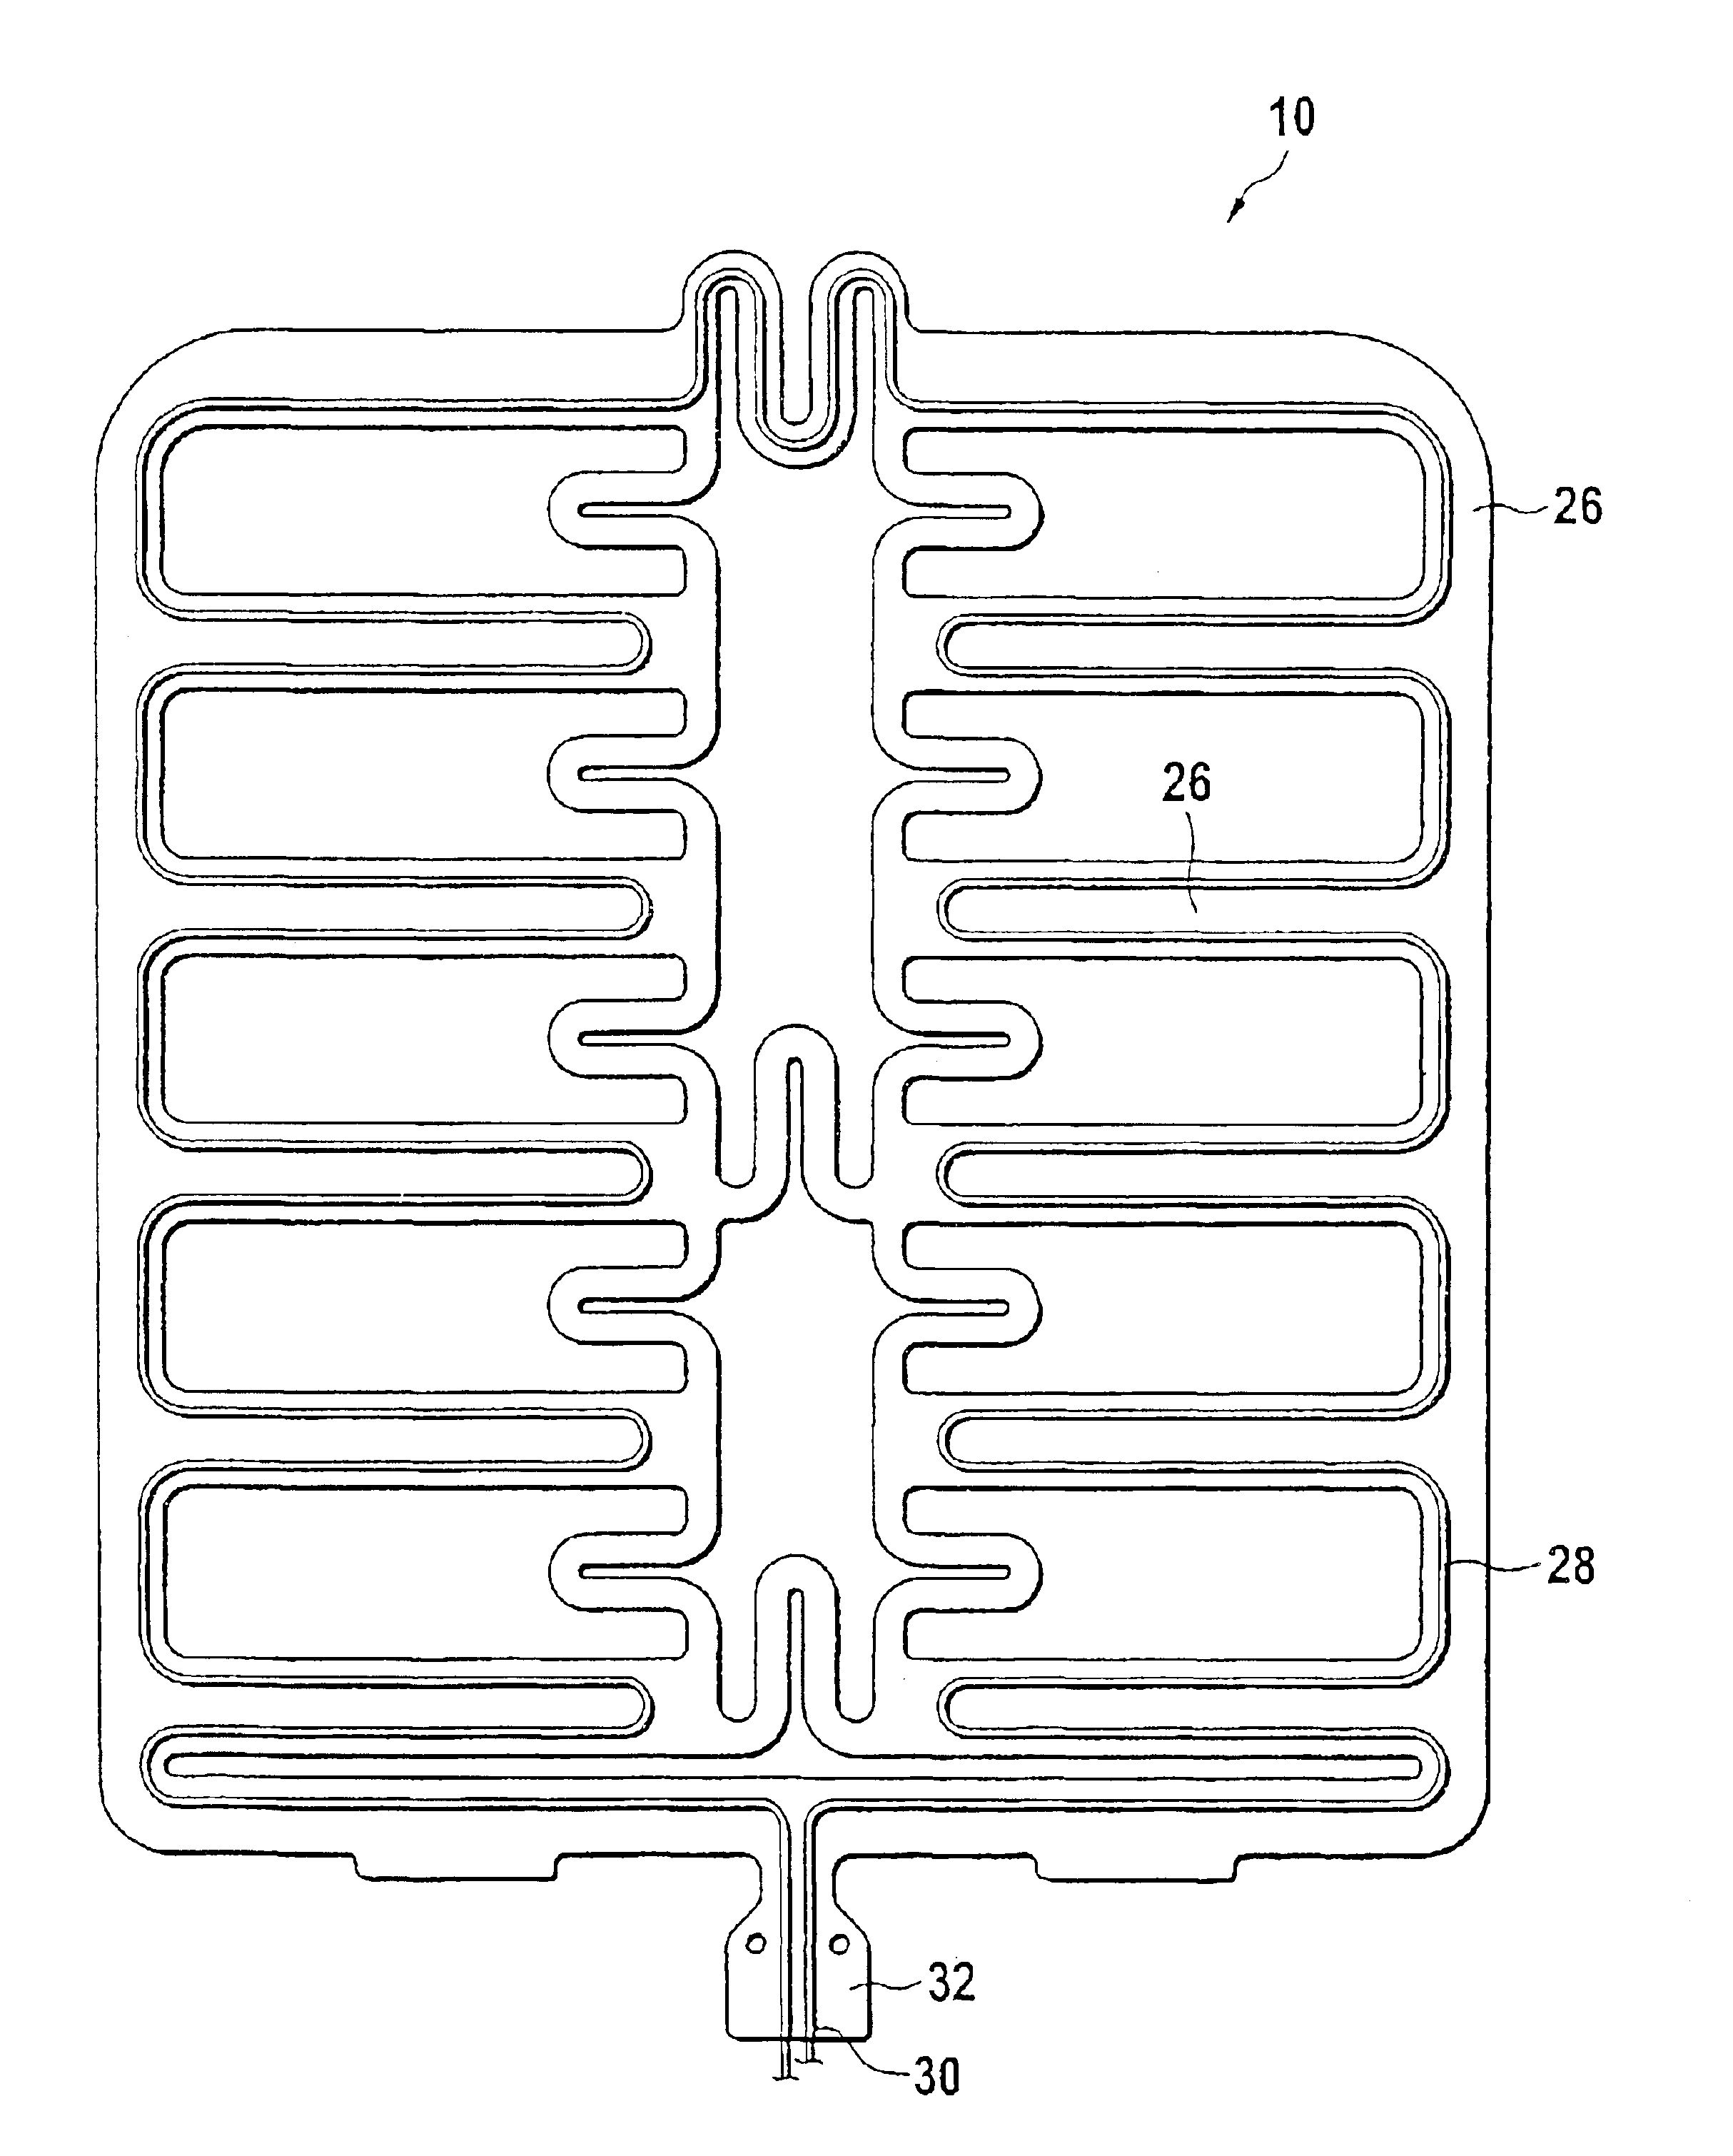 Combined sensor and heating element